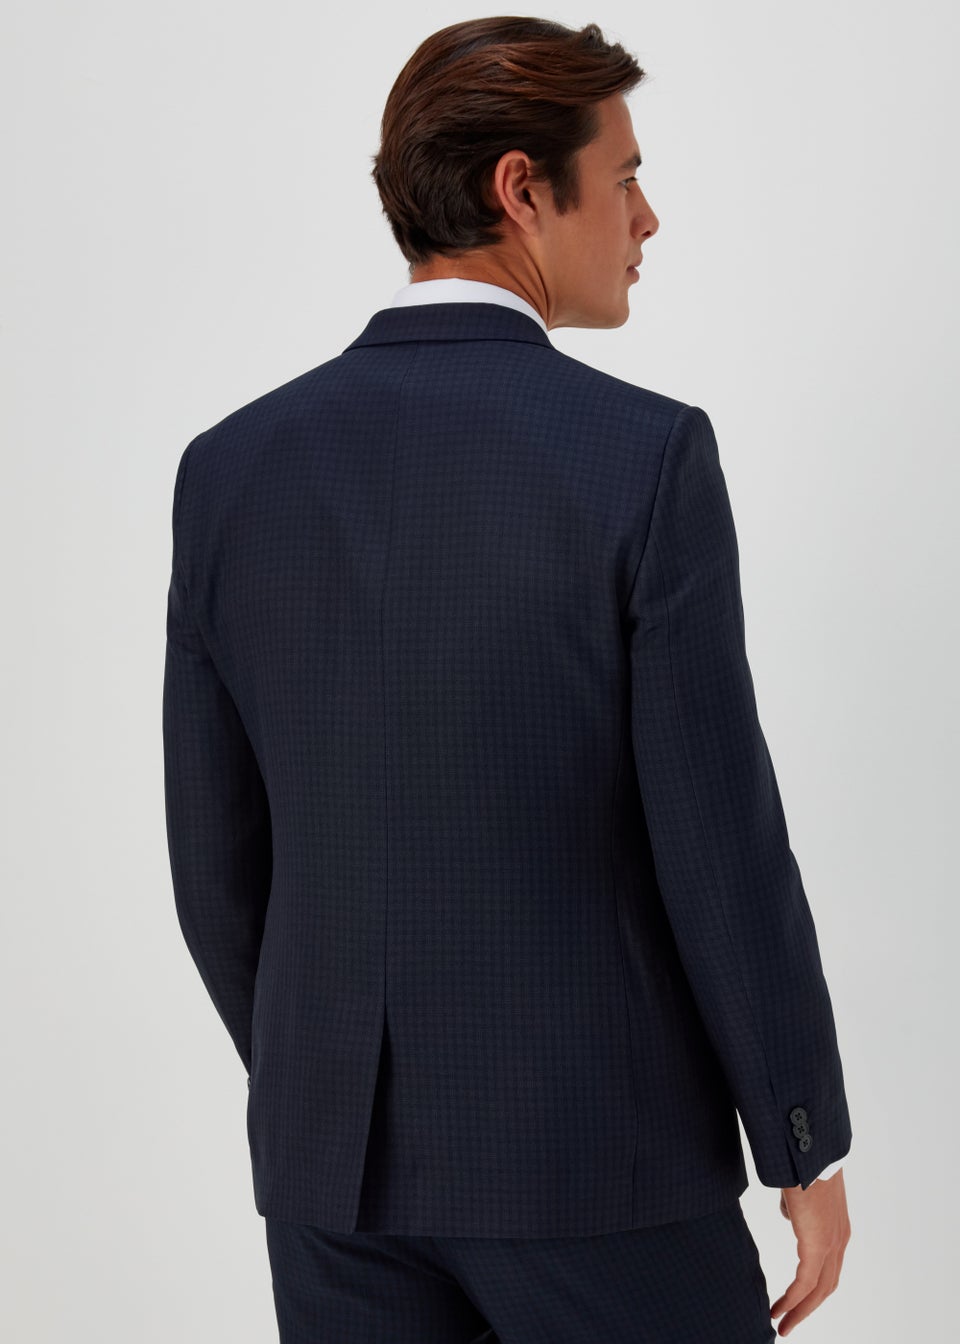 Taylor & Wright Tyne Navy Check Tailored Fit Suit Jacket